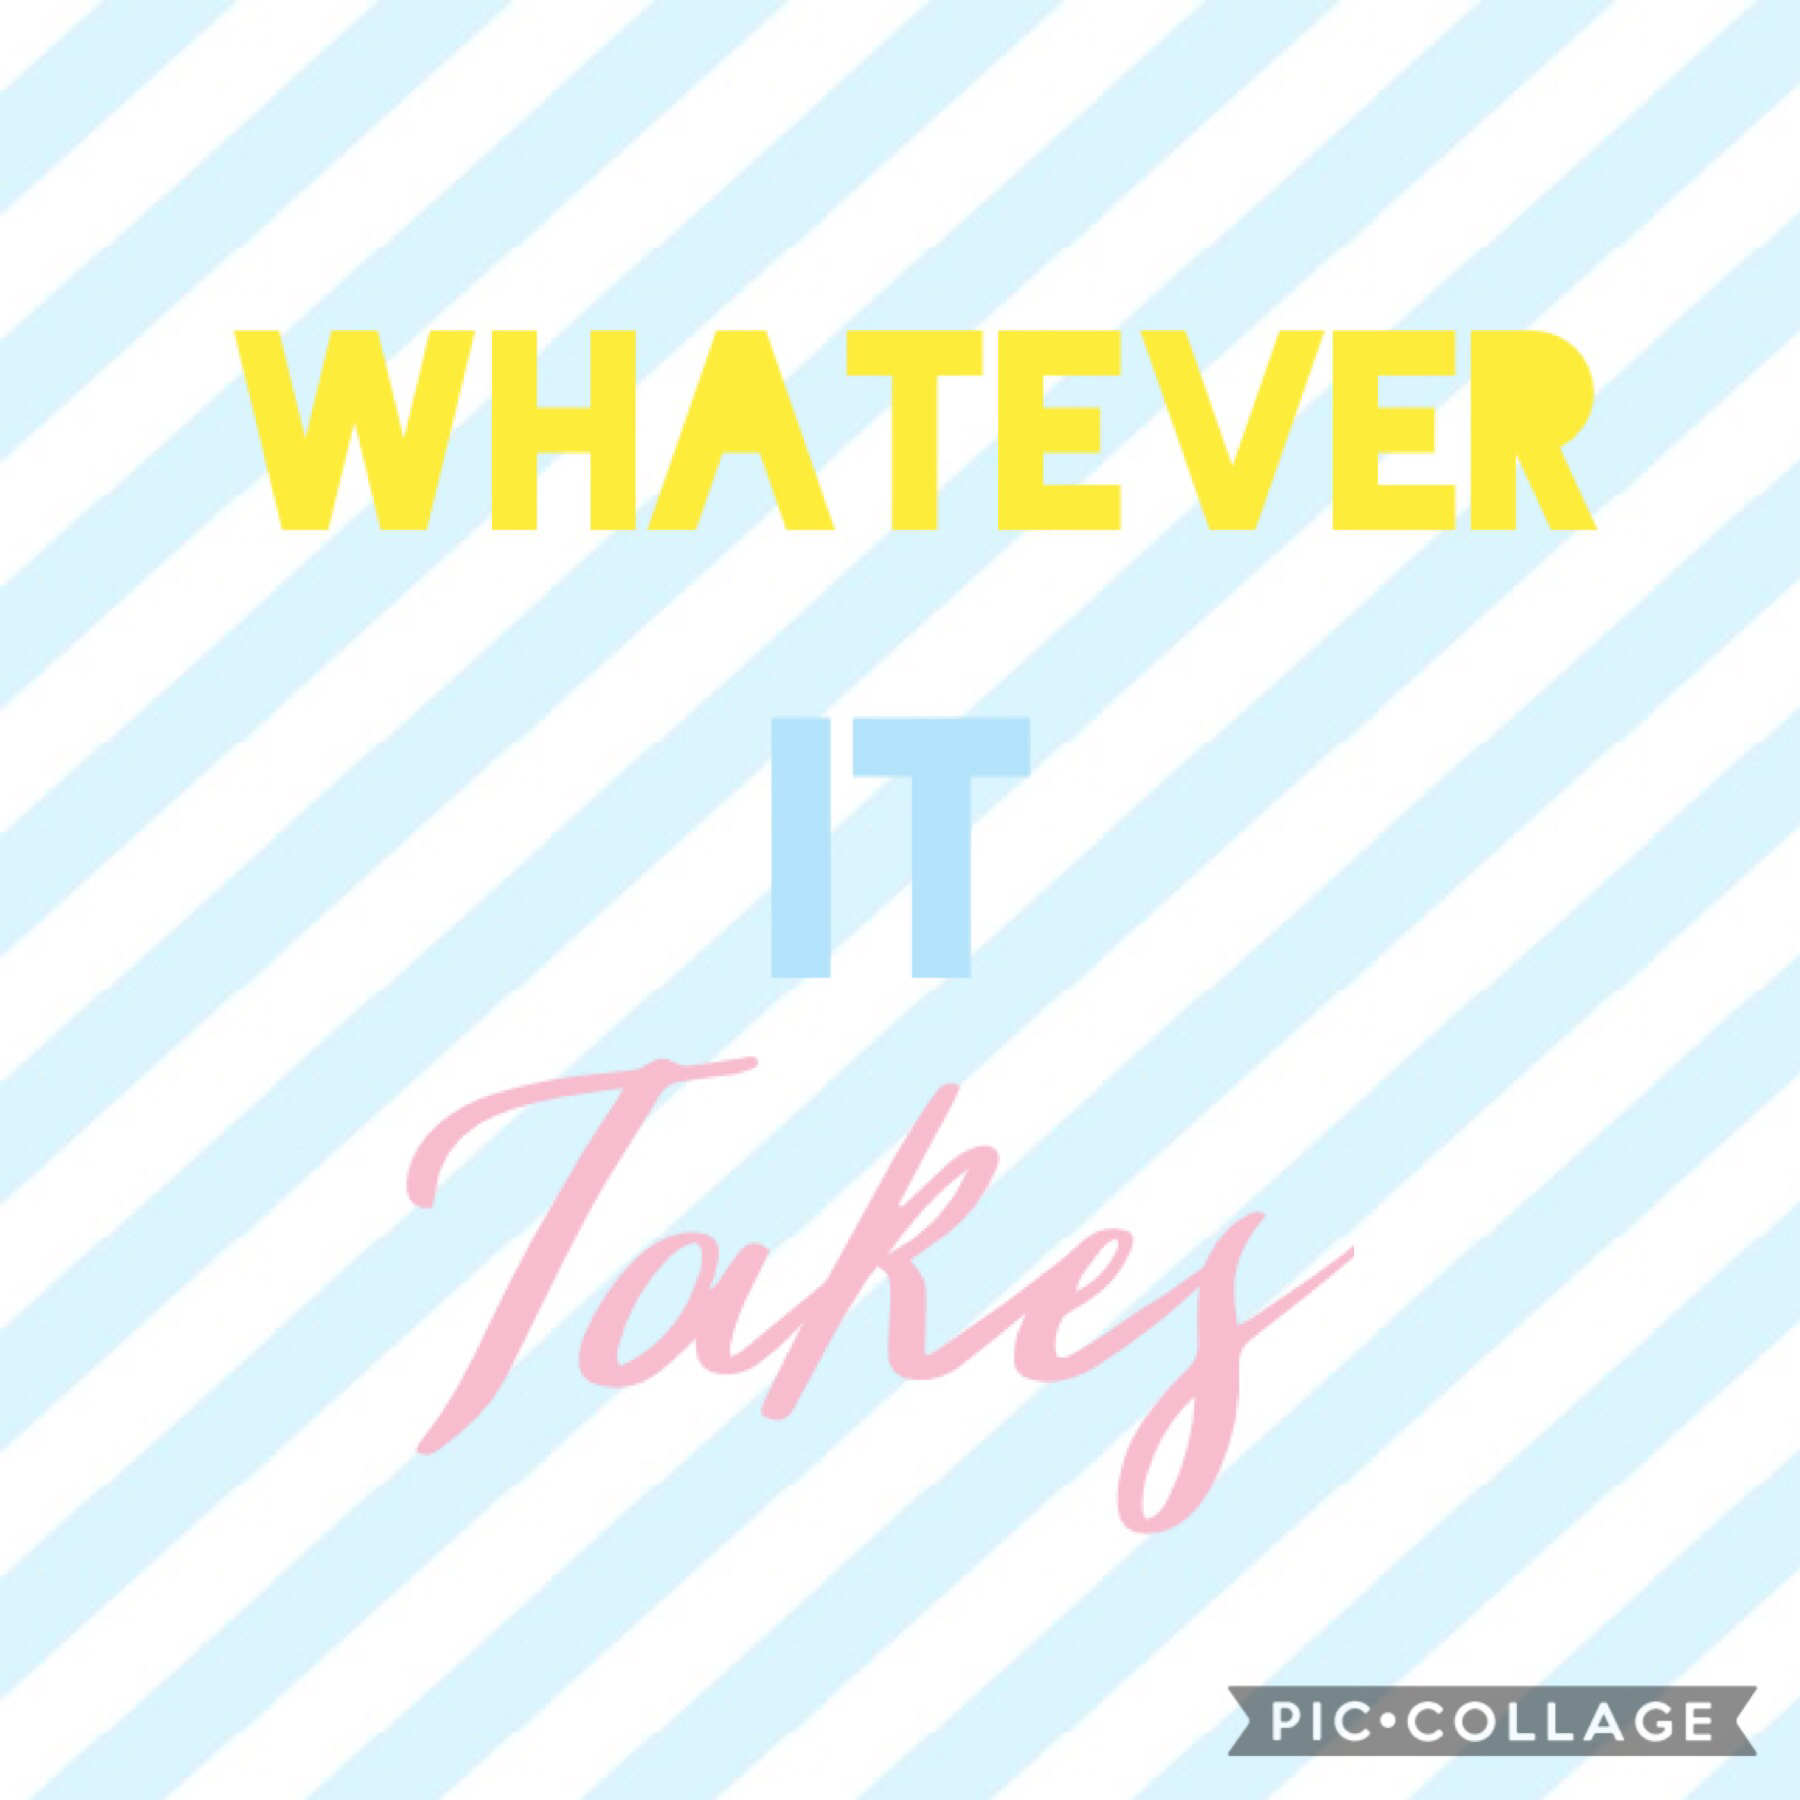 TAP
Whatever it takes! 🎀